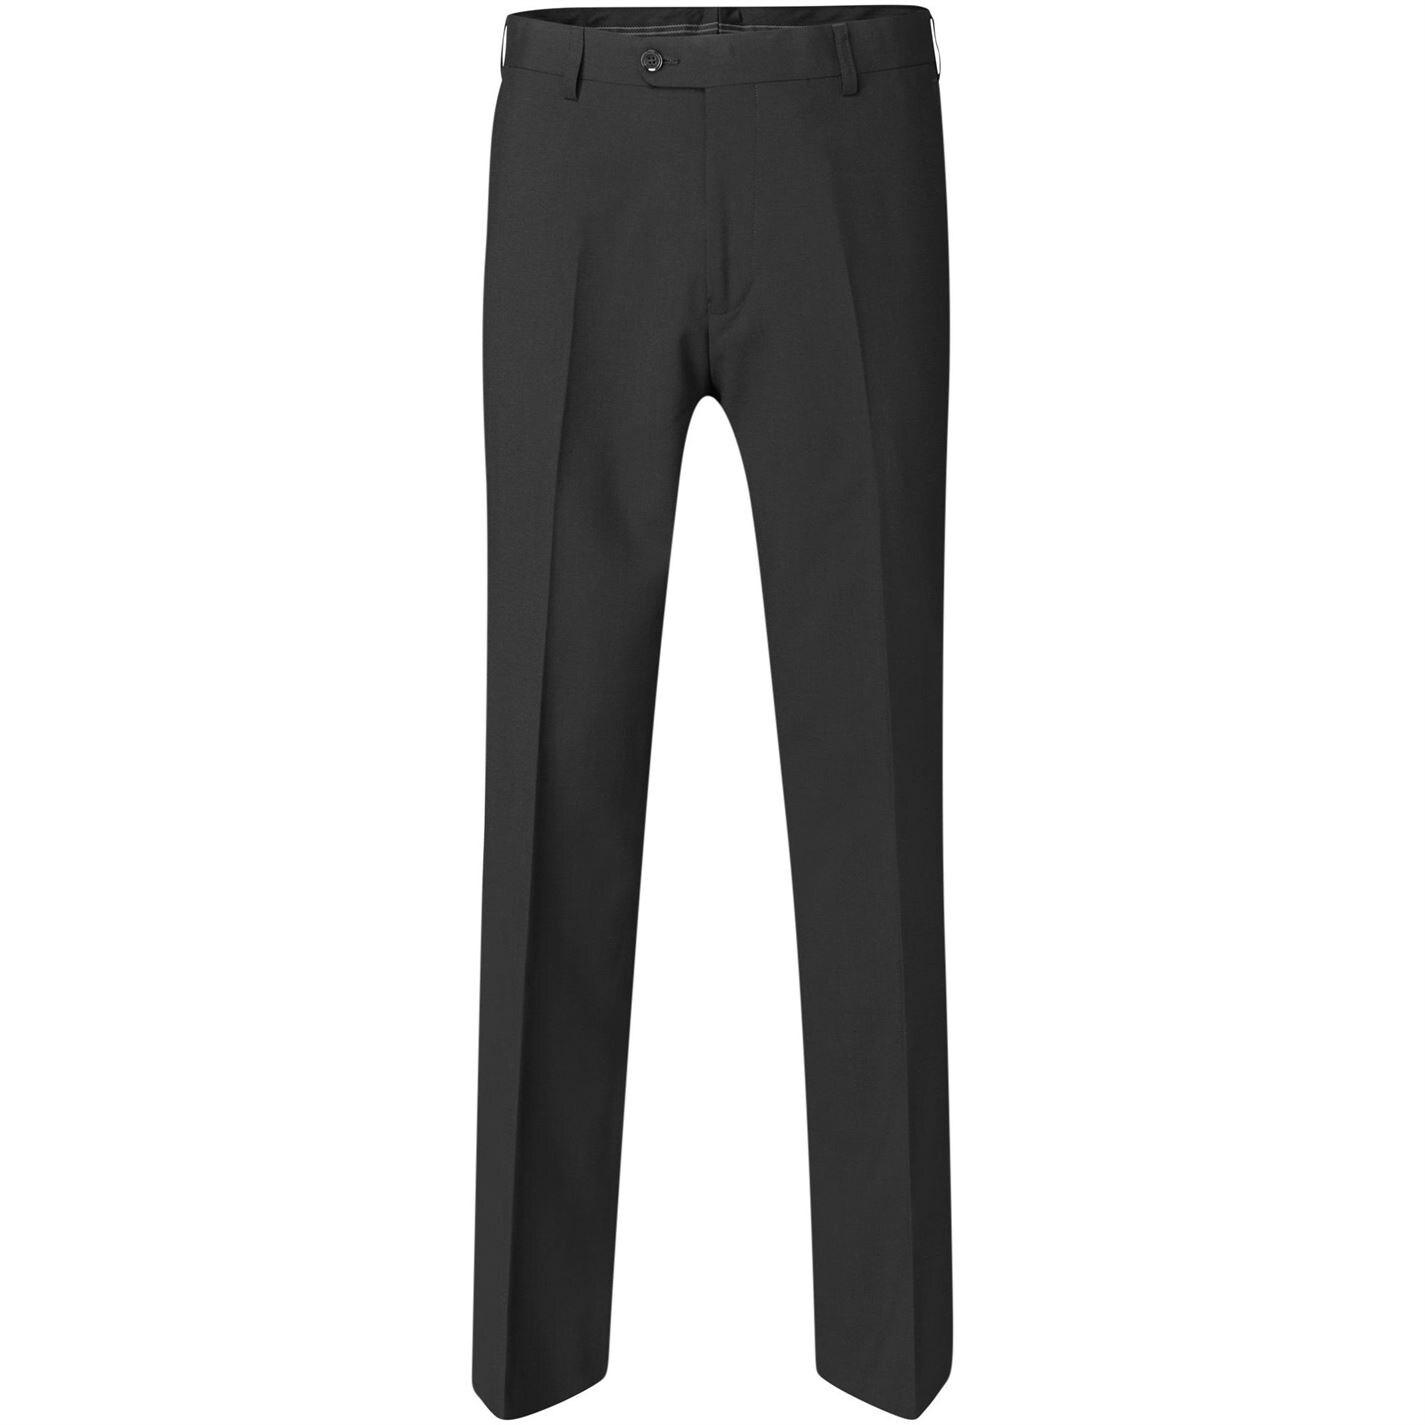 Skopes Darwin Tailored Wool Blend Suit Trousers in Charcoal (Black) for ...